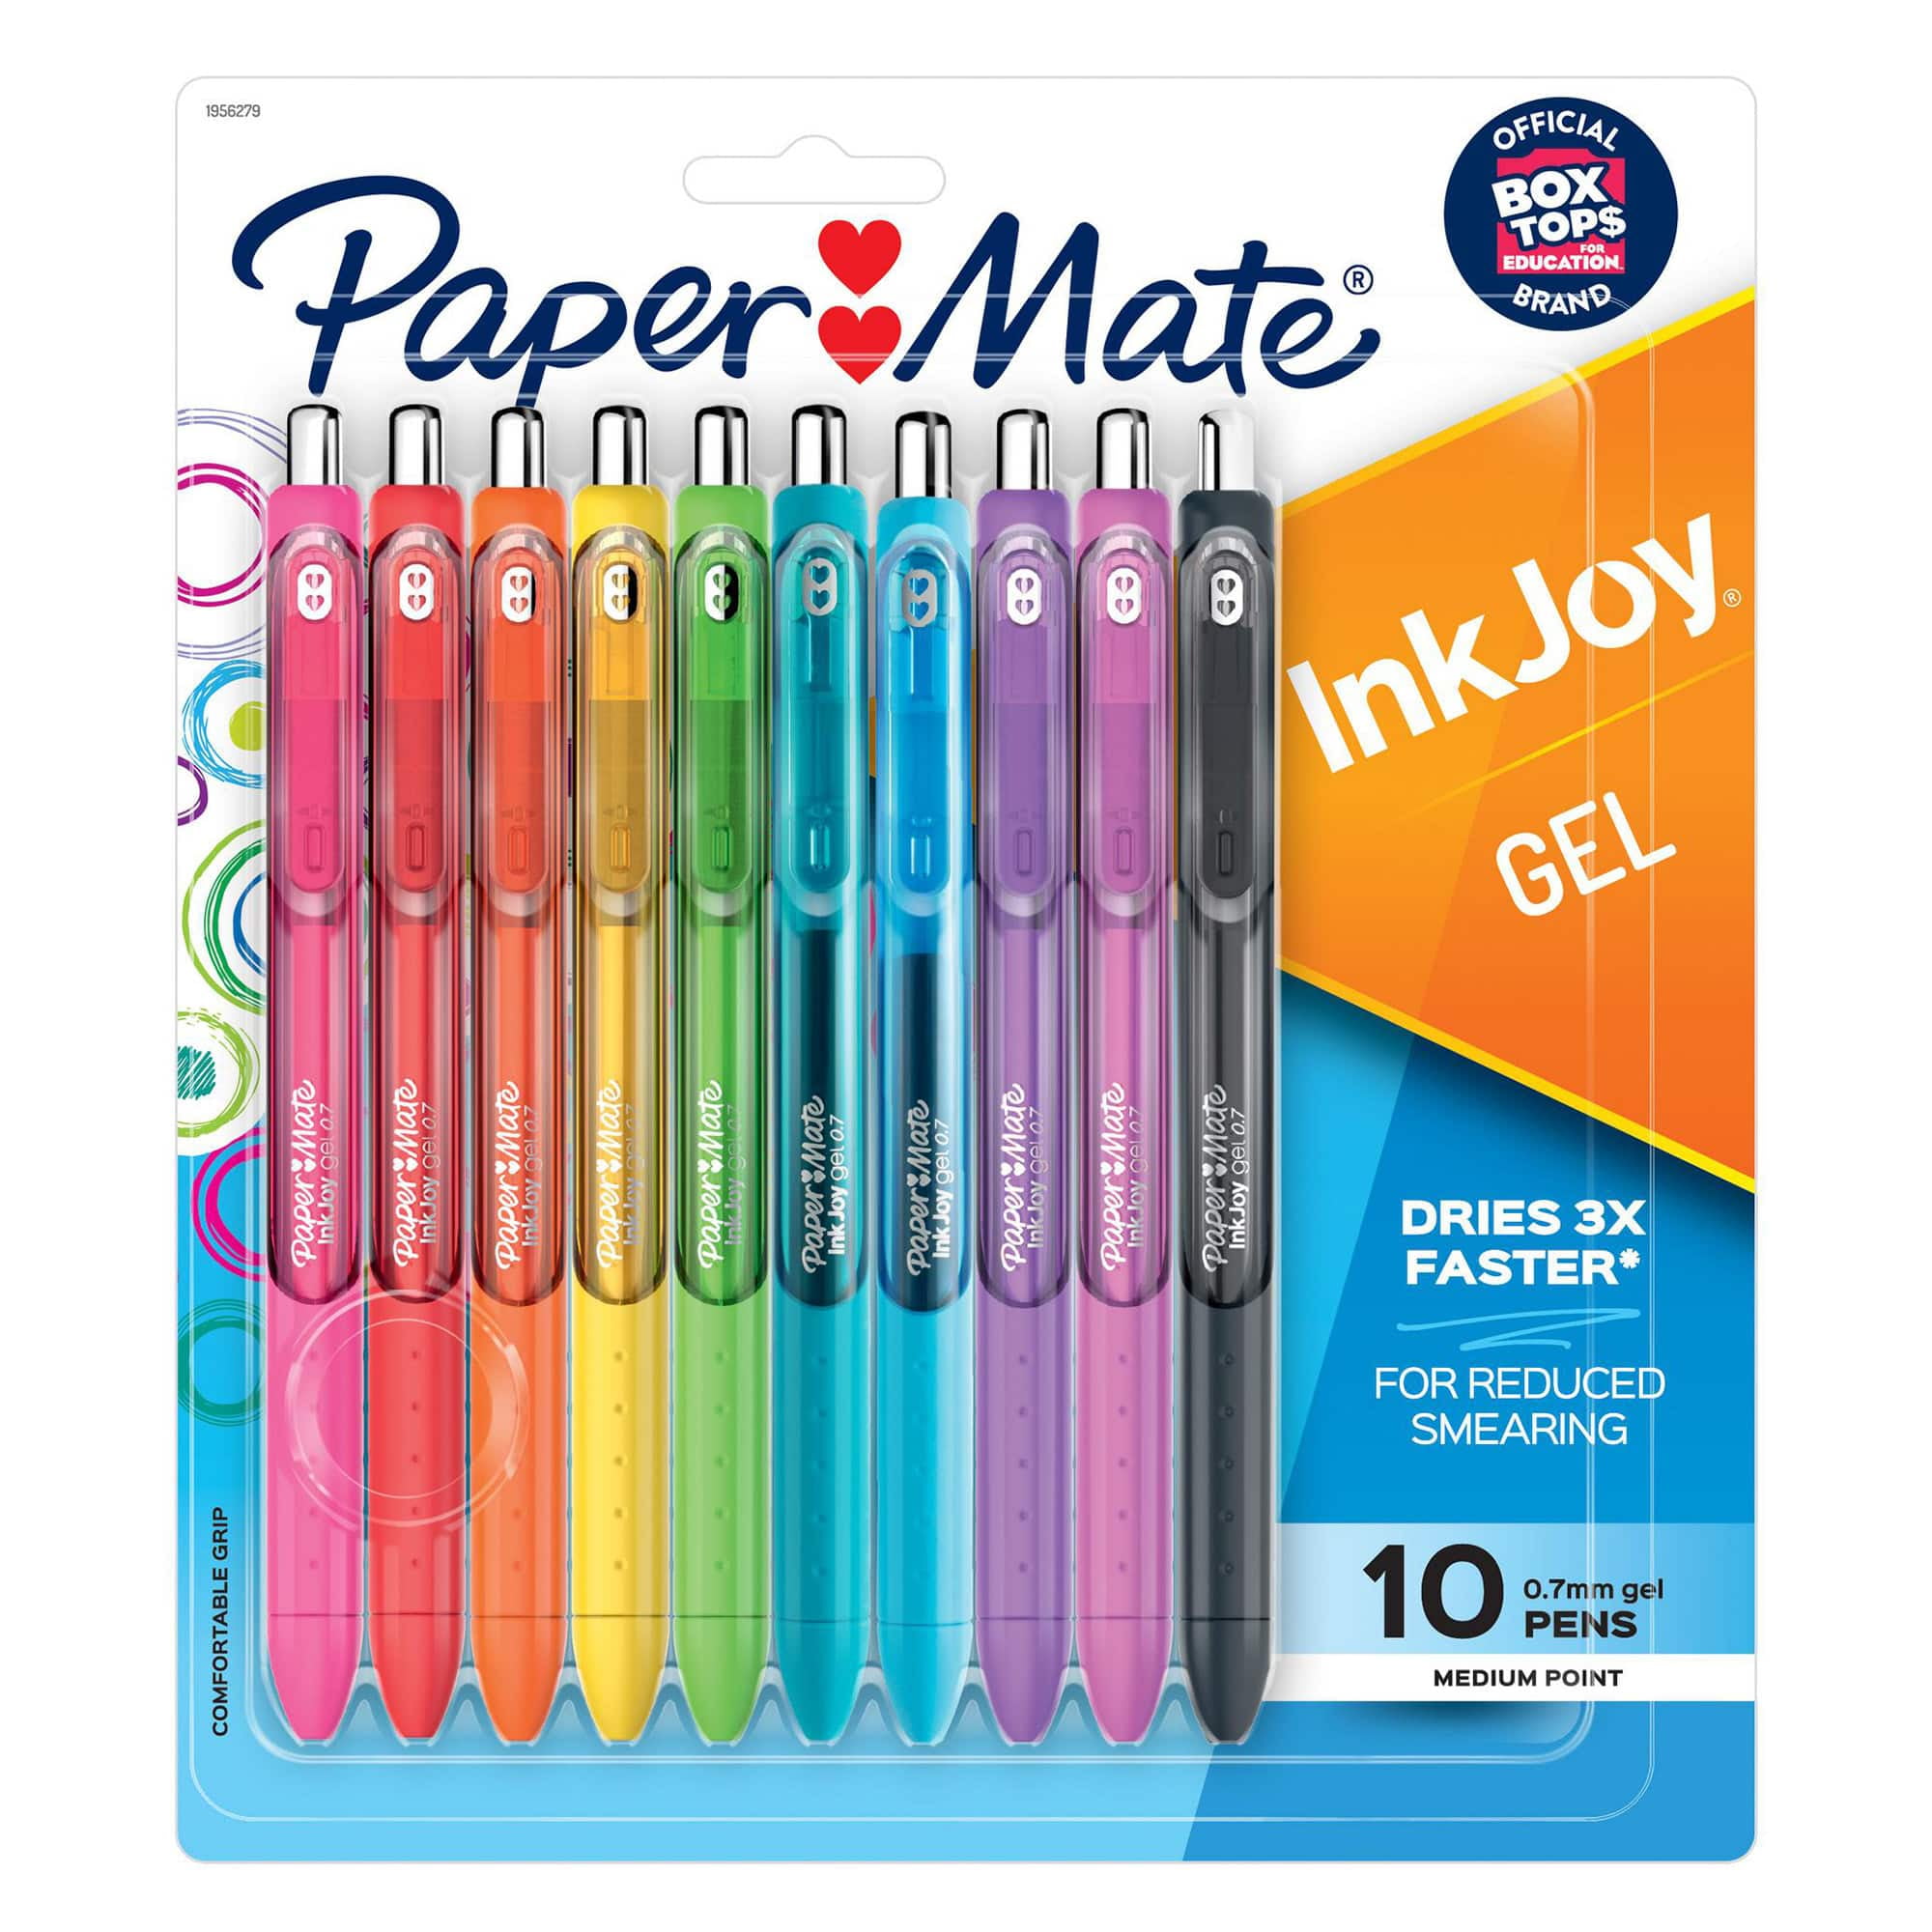 45 Colors Colorful Pens For Notebook, Painting, Filling & Writing